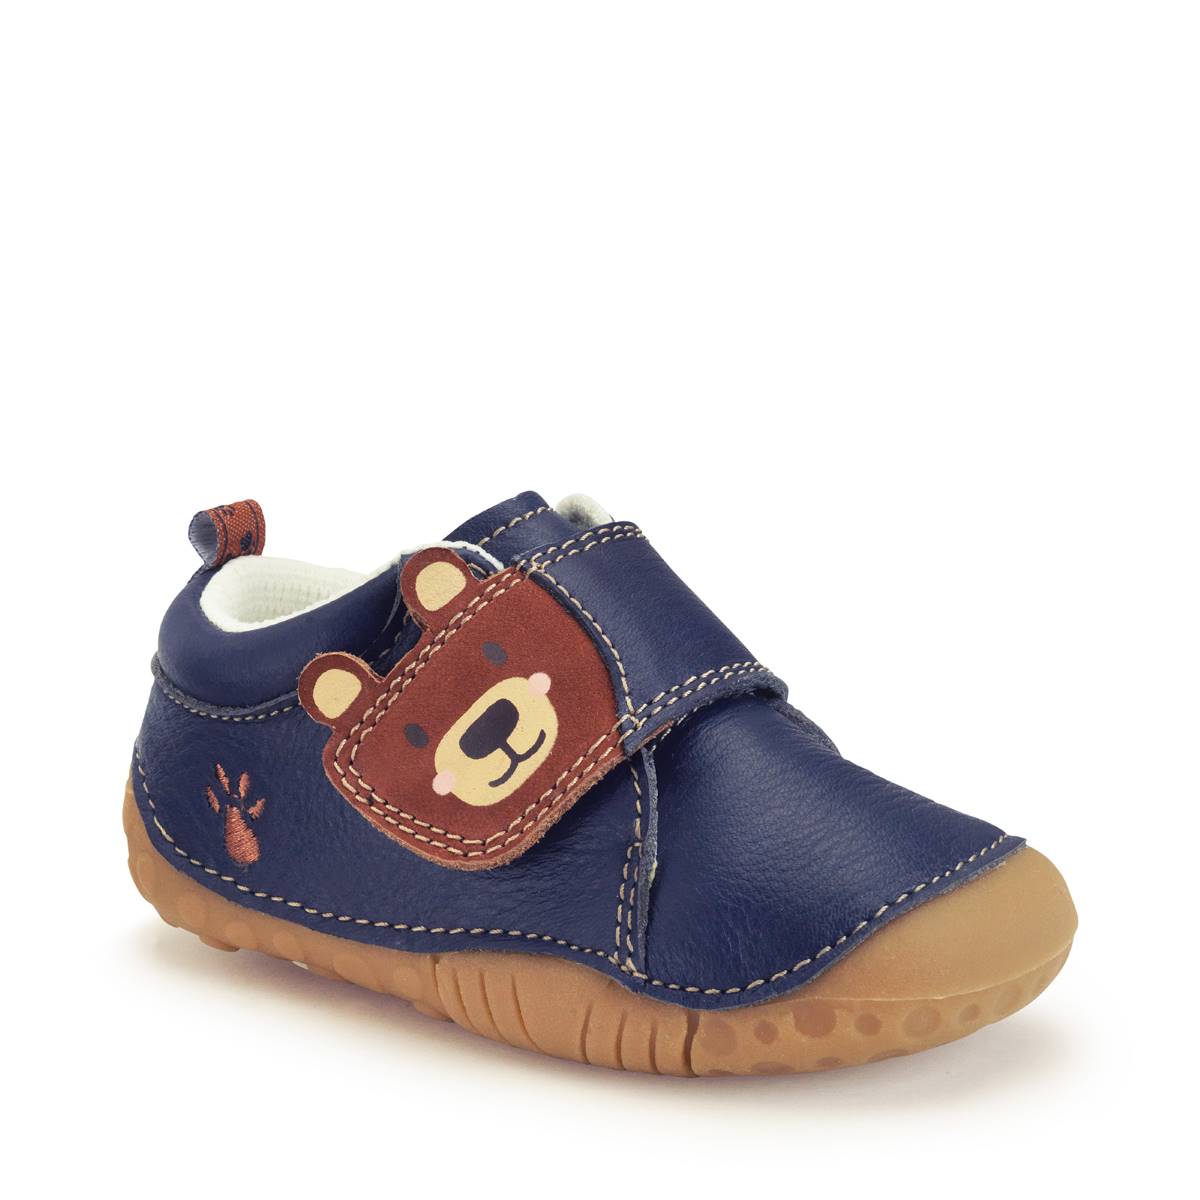 Start Rite Bear Hug 1v BLUE LEATHER Kids Boys First Shoes 0824-96F in a Plain Leather in Size 5